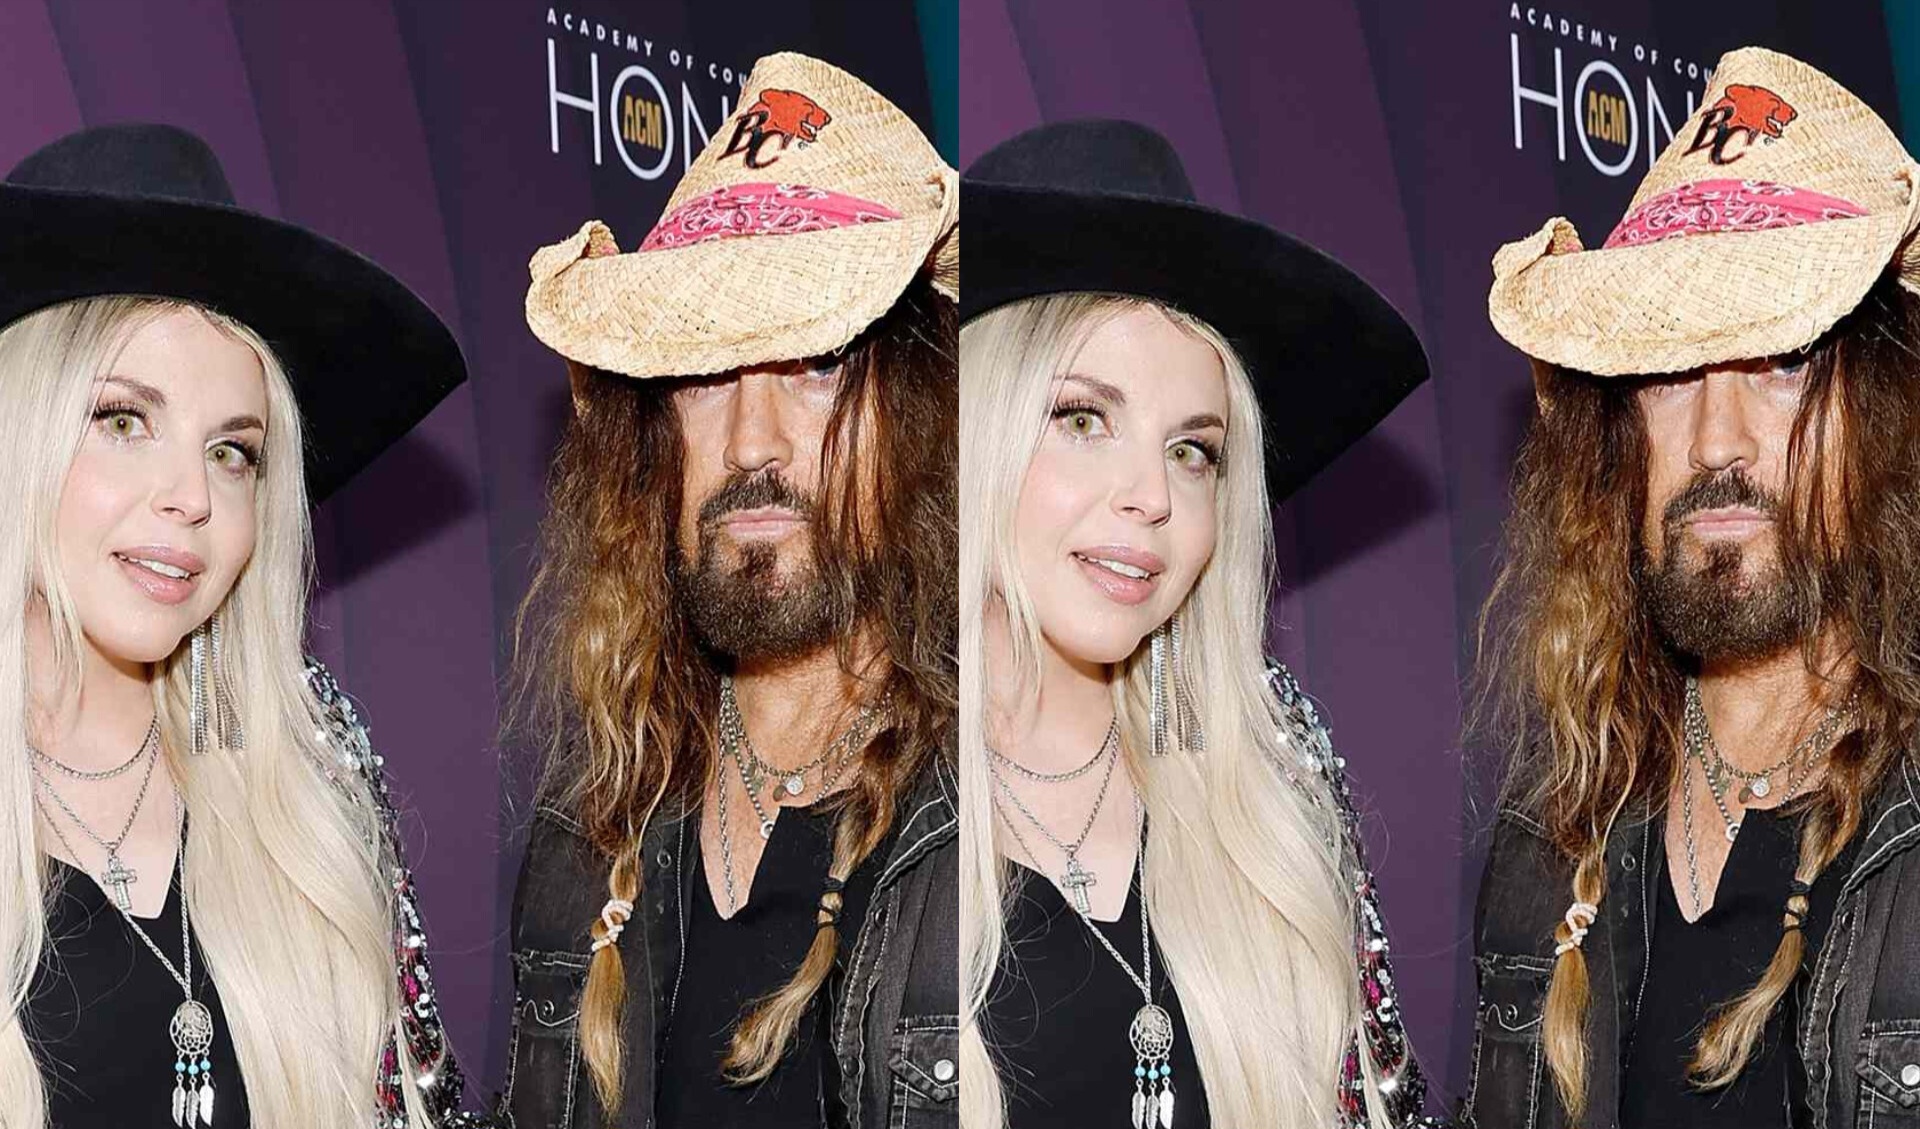 Billy Ray Cyrus' ex, Firerose, reveals 'strict rules' and alleges 'domestic abuse' amid their divorce battle.